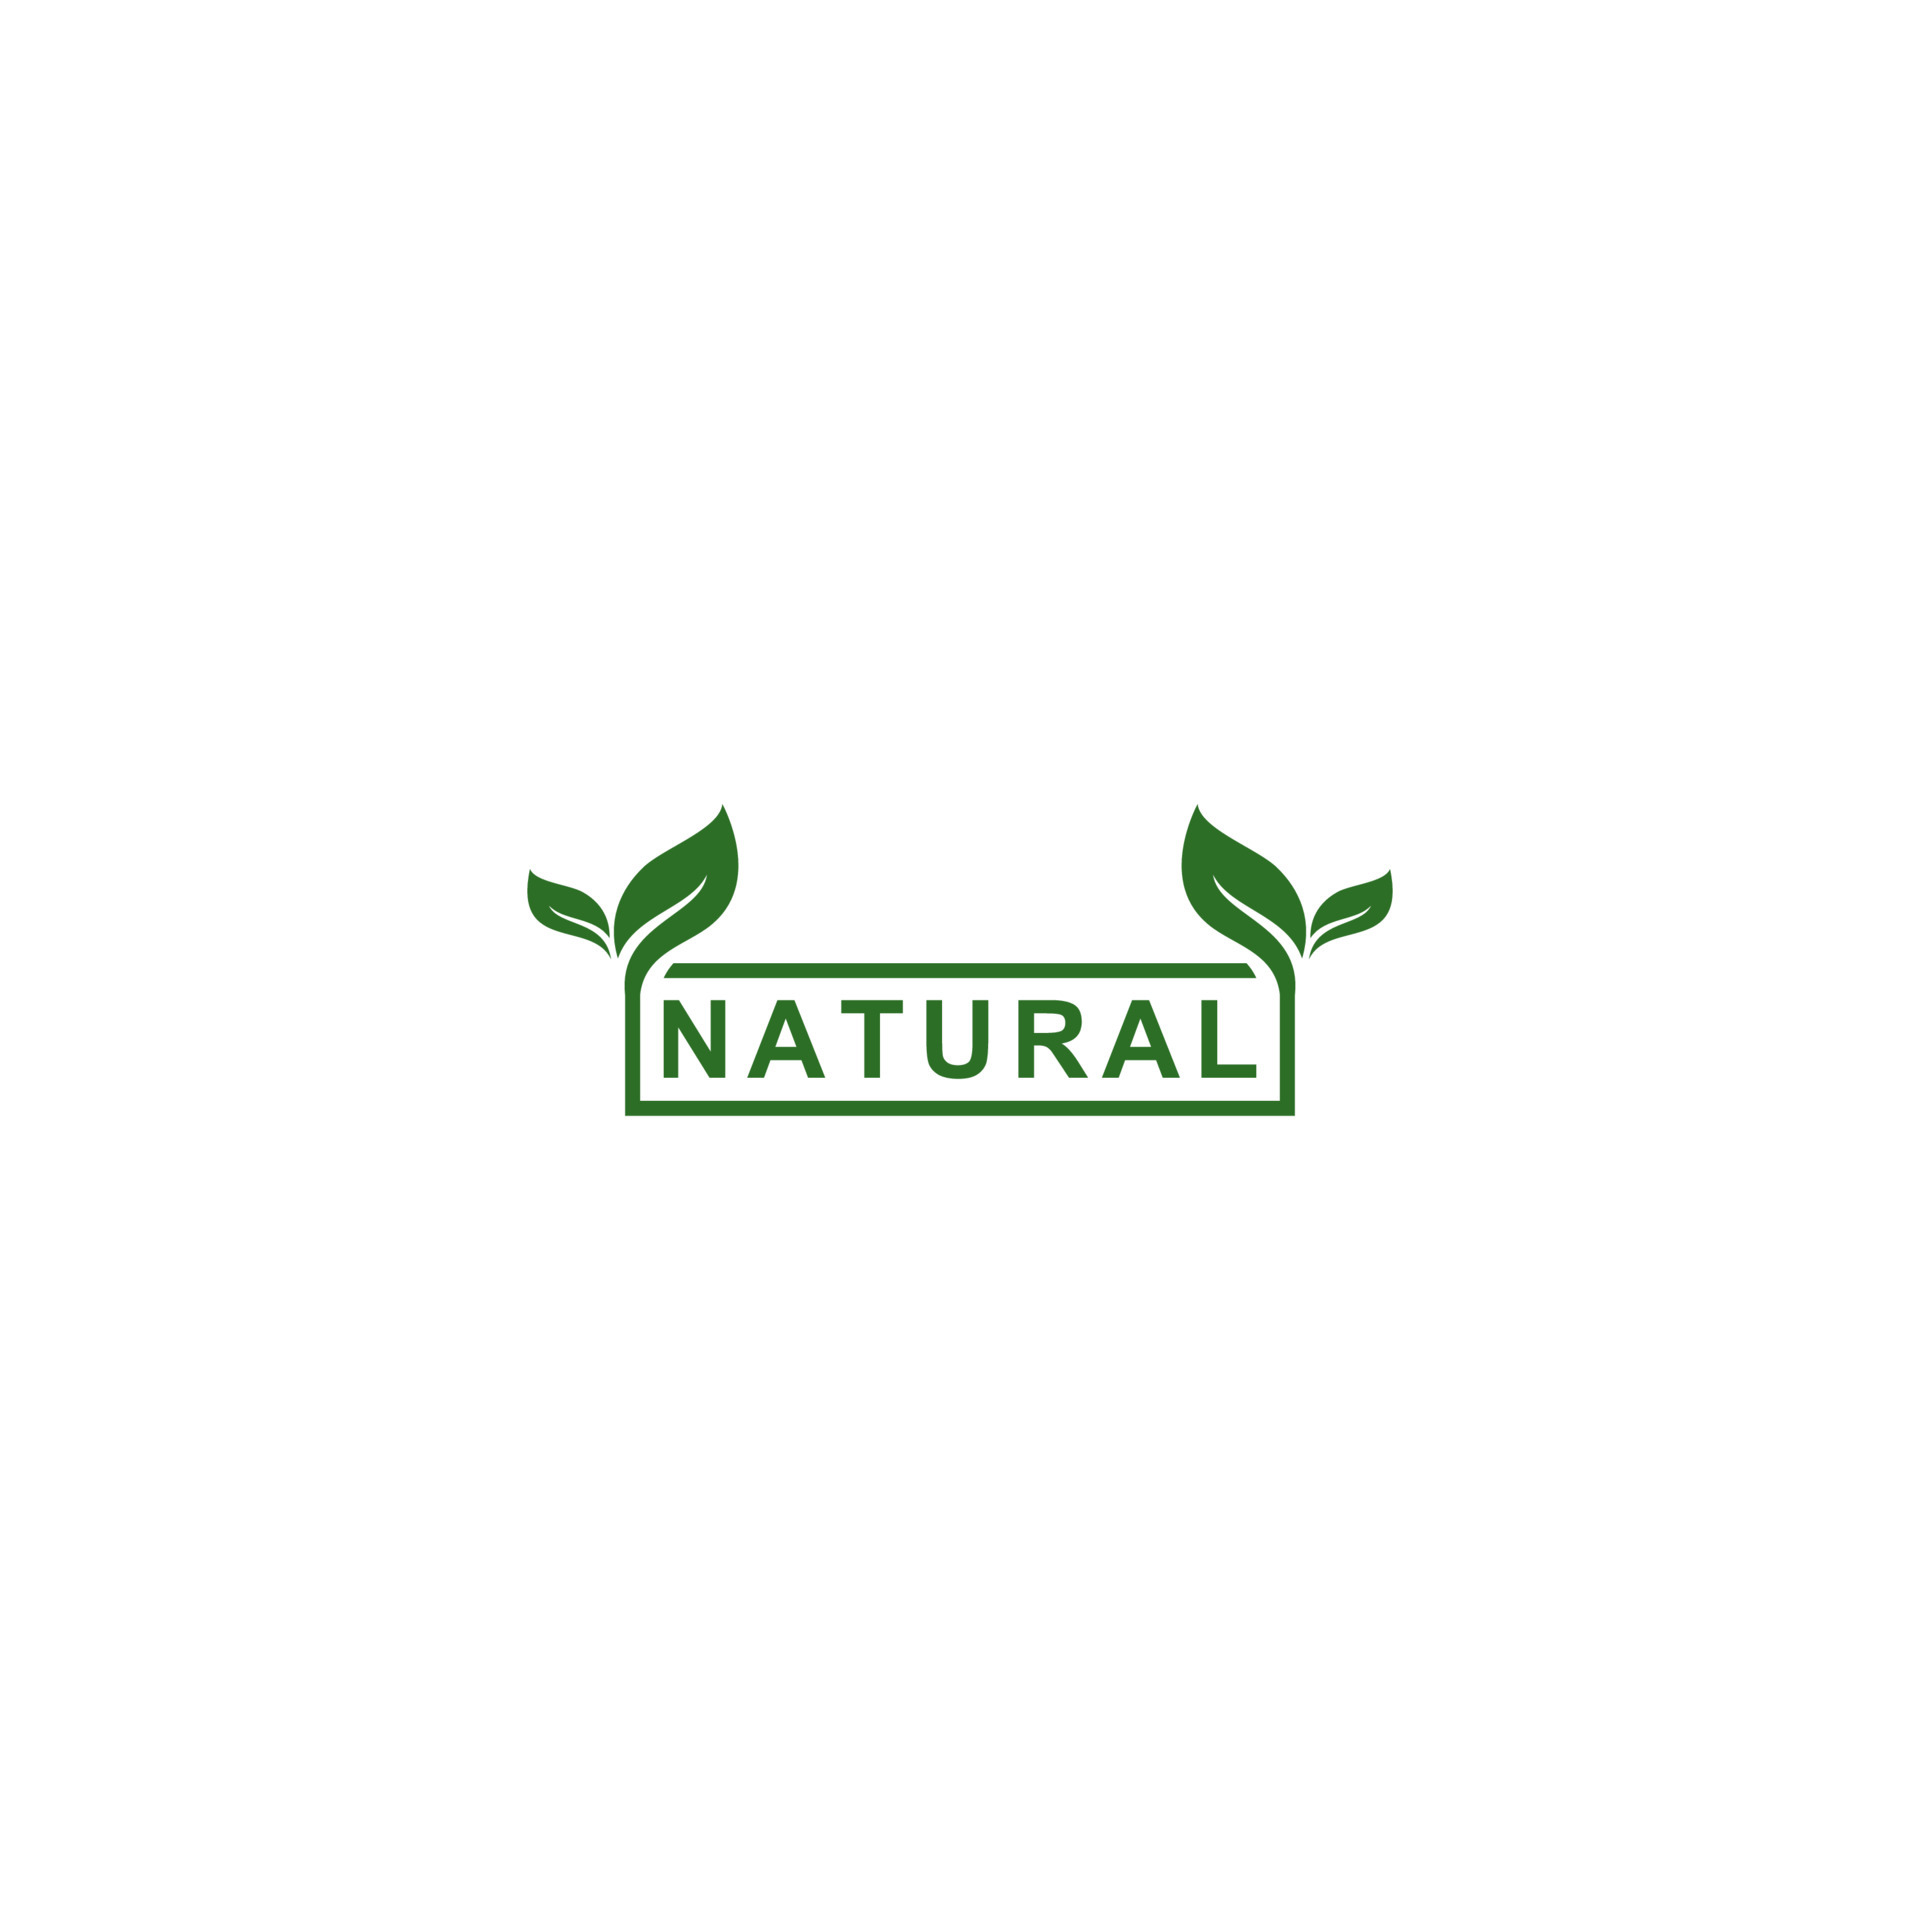 natural logo template vector, icon in white background 4678893 Vector ...